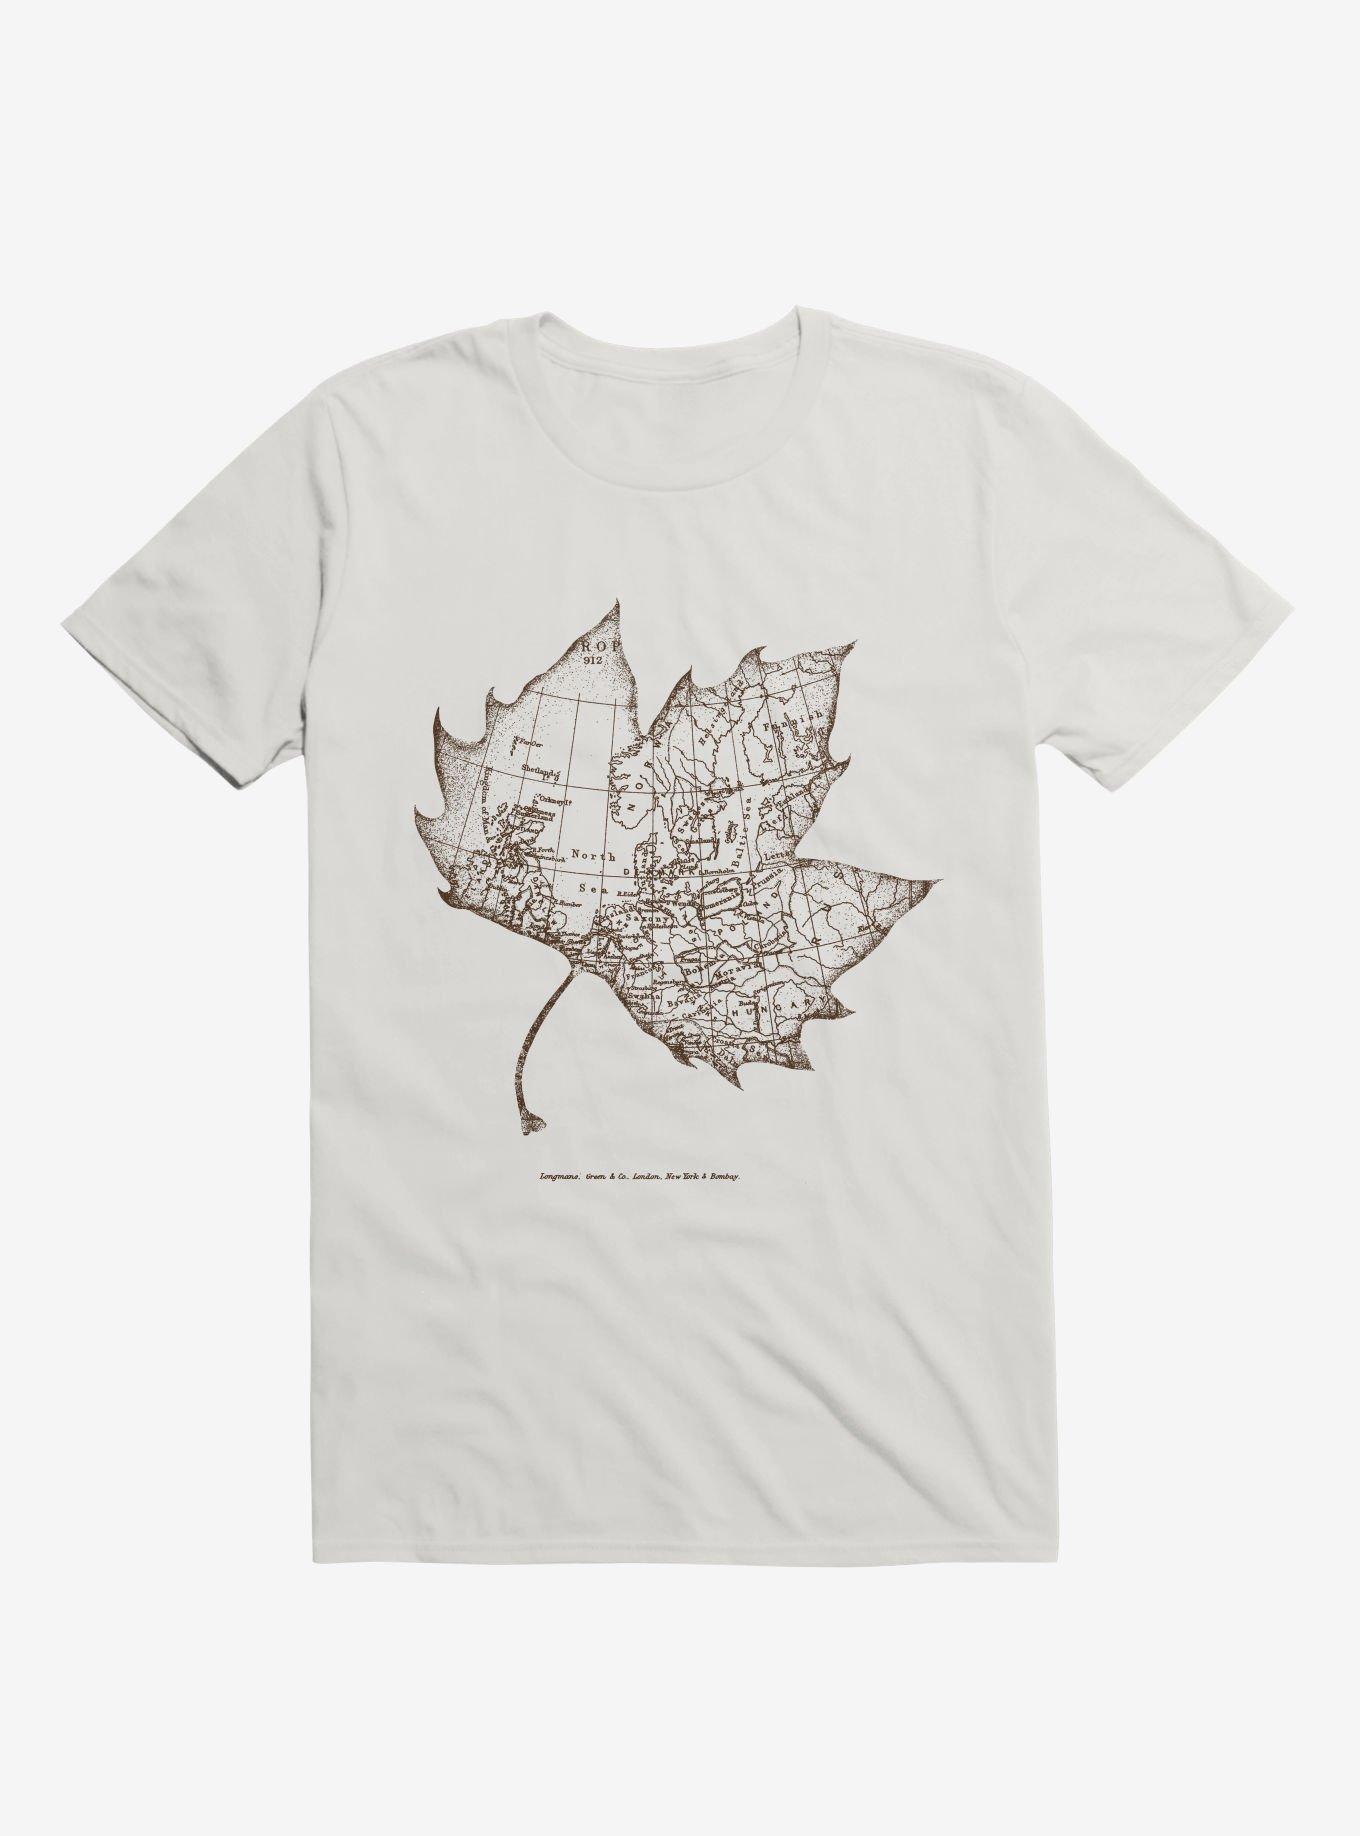 Travel With The Wind T-Shirt, WHITE, hi-res